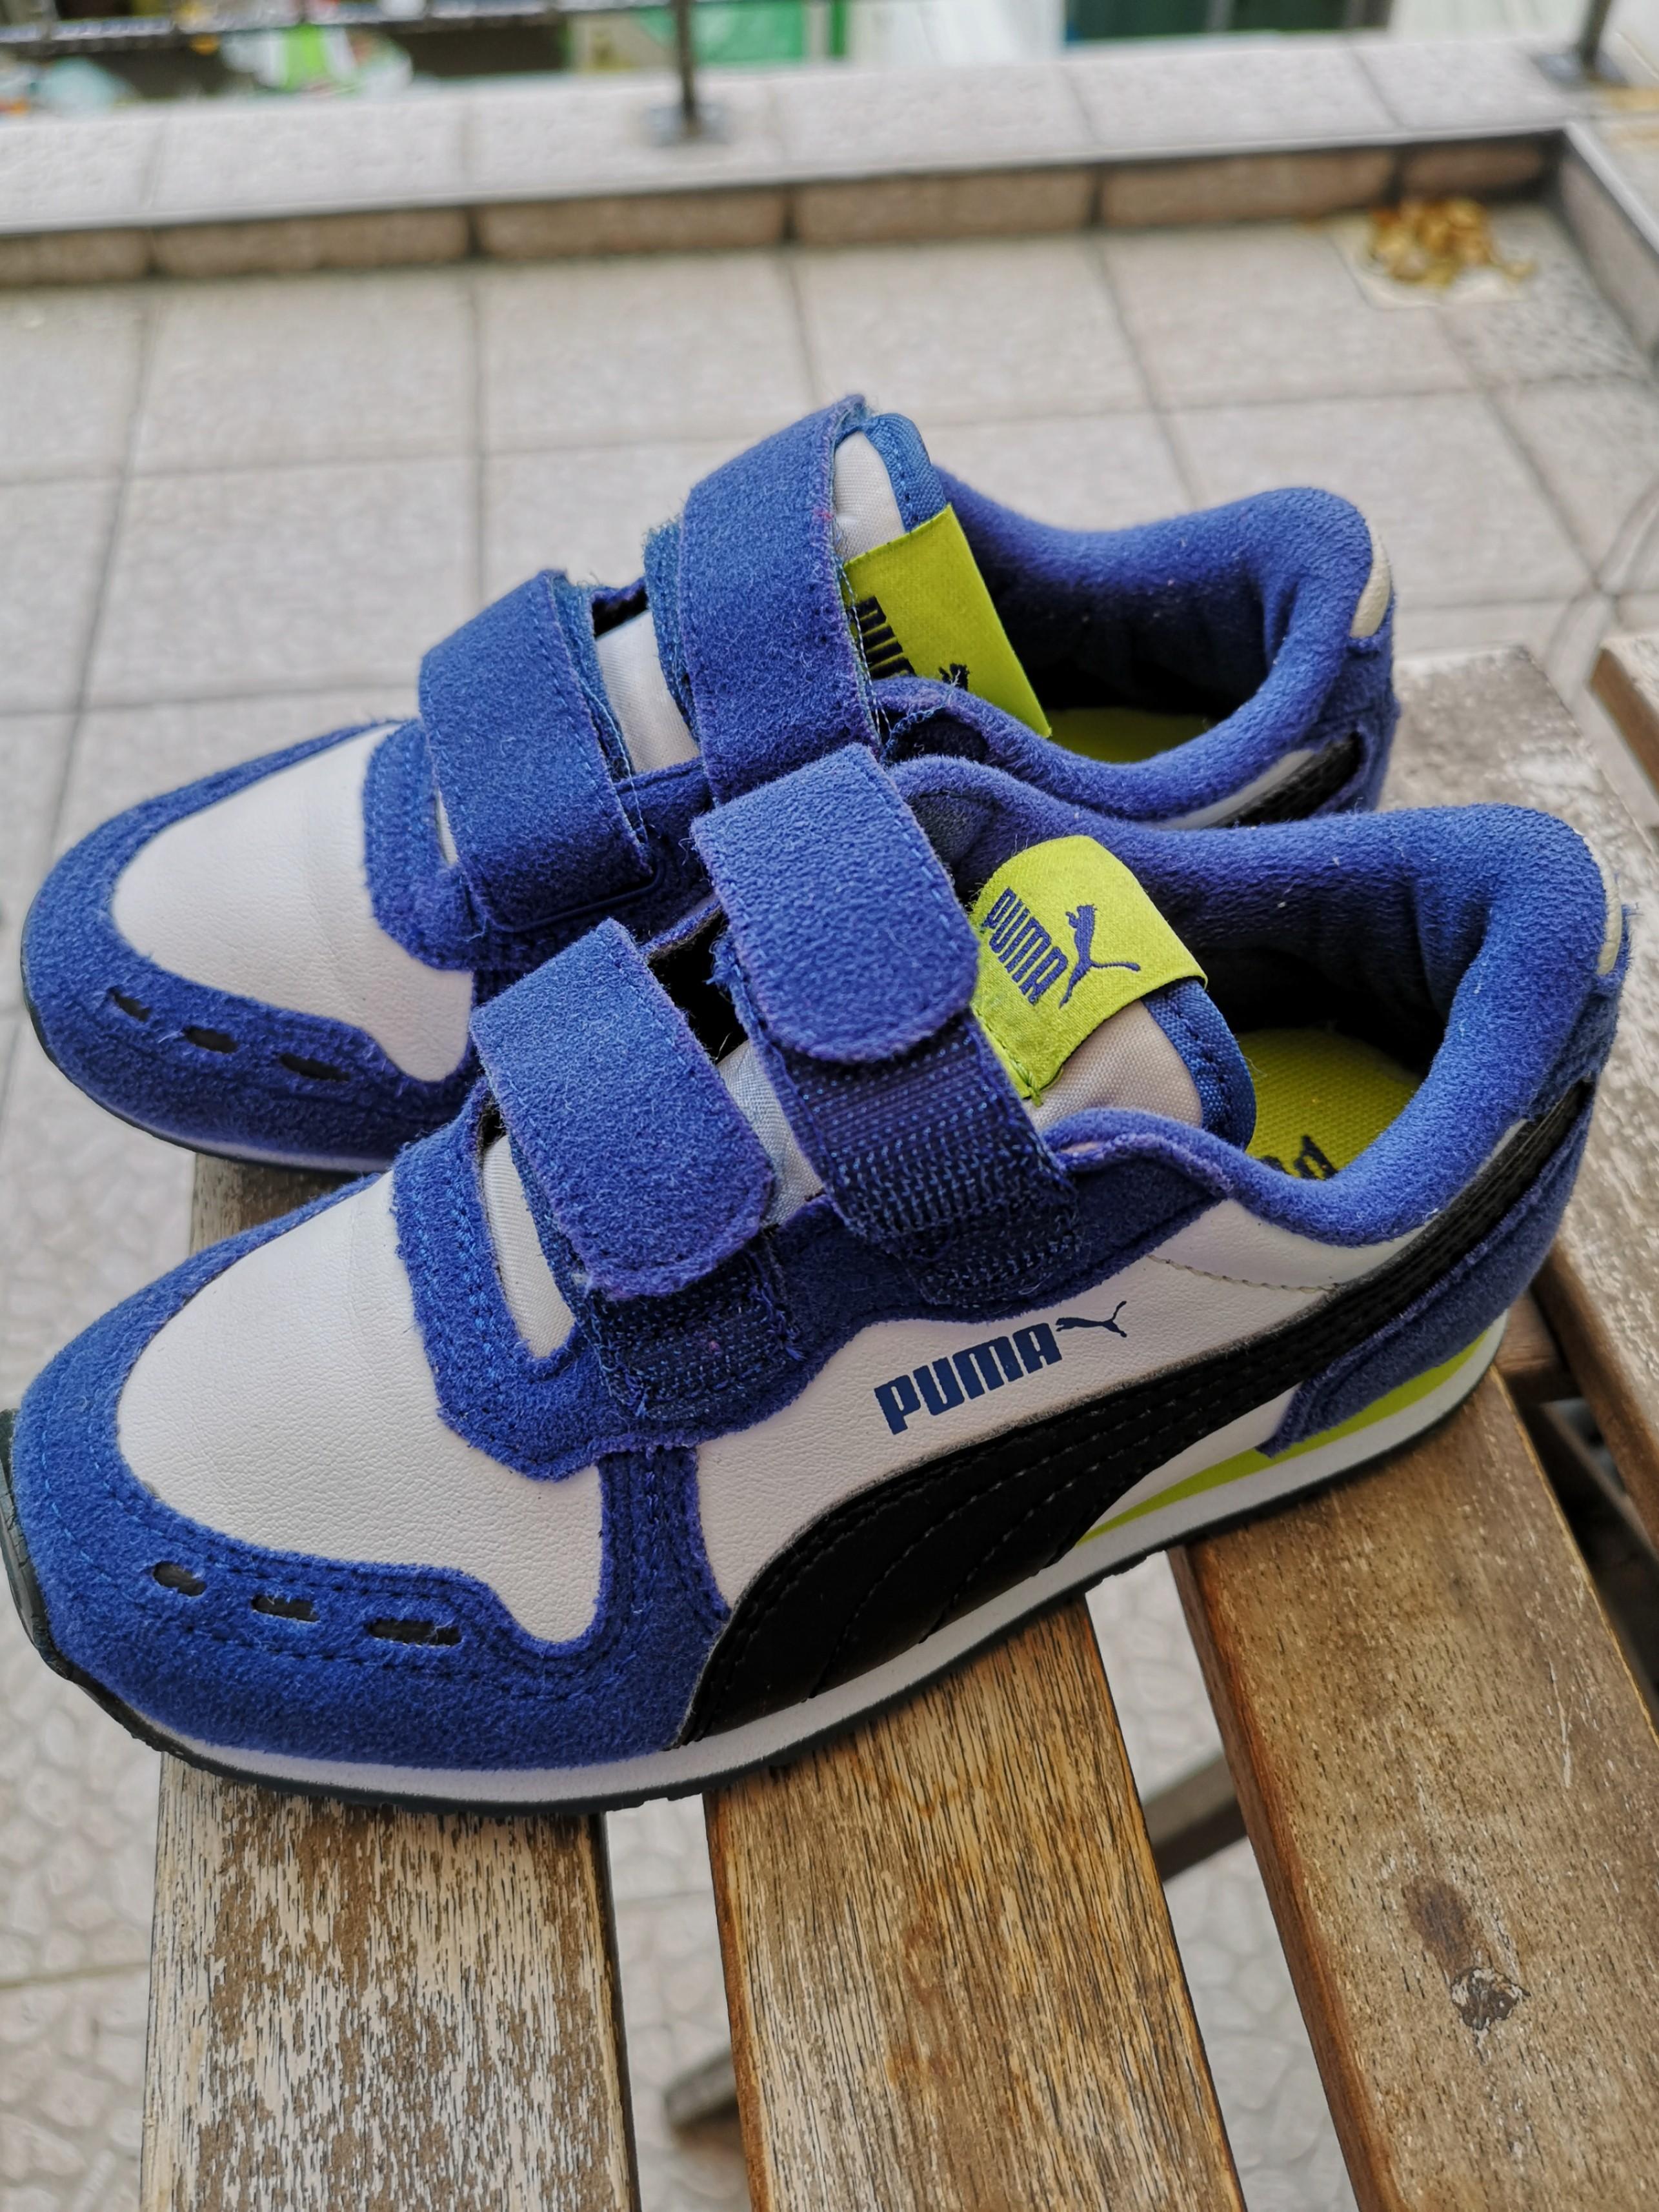 puma shoes for 3 year old